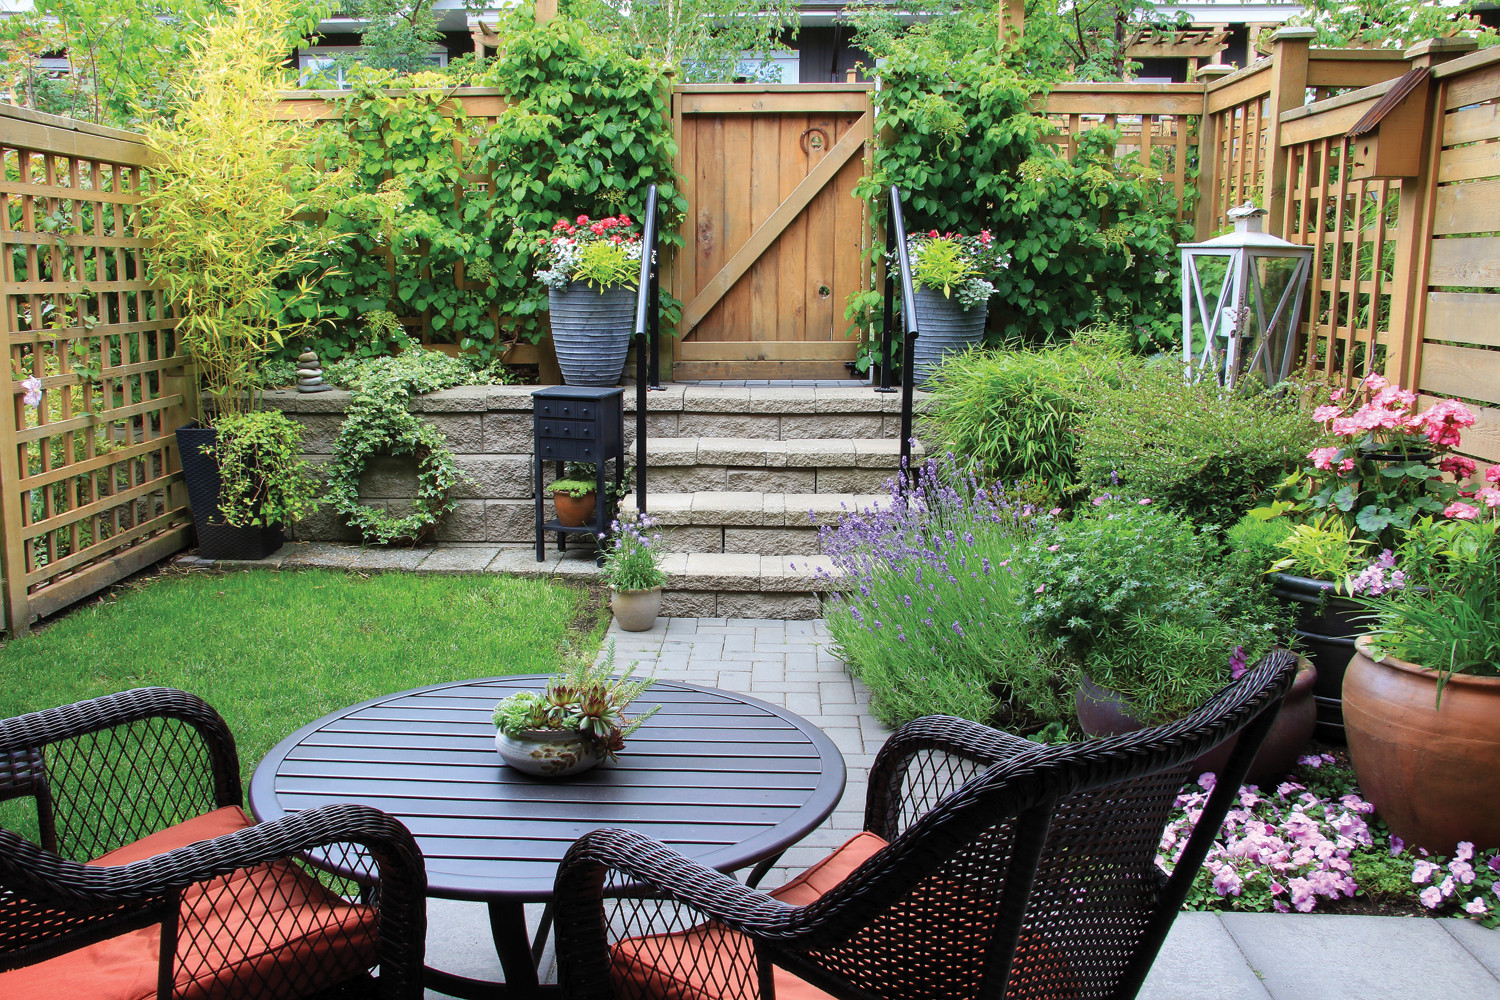 https://gardening.usask.ca/images/healthy-yards/small-space/ResizedYardiStock_000067082589_Double.jpg